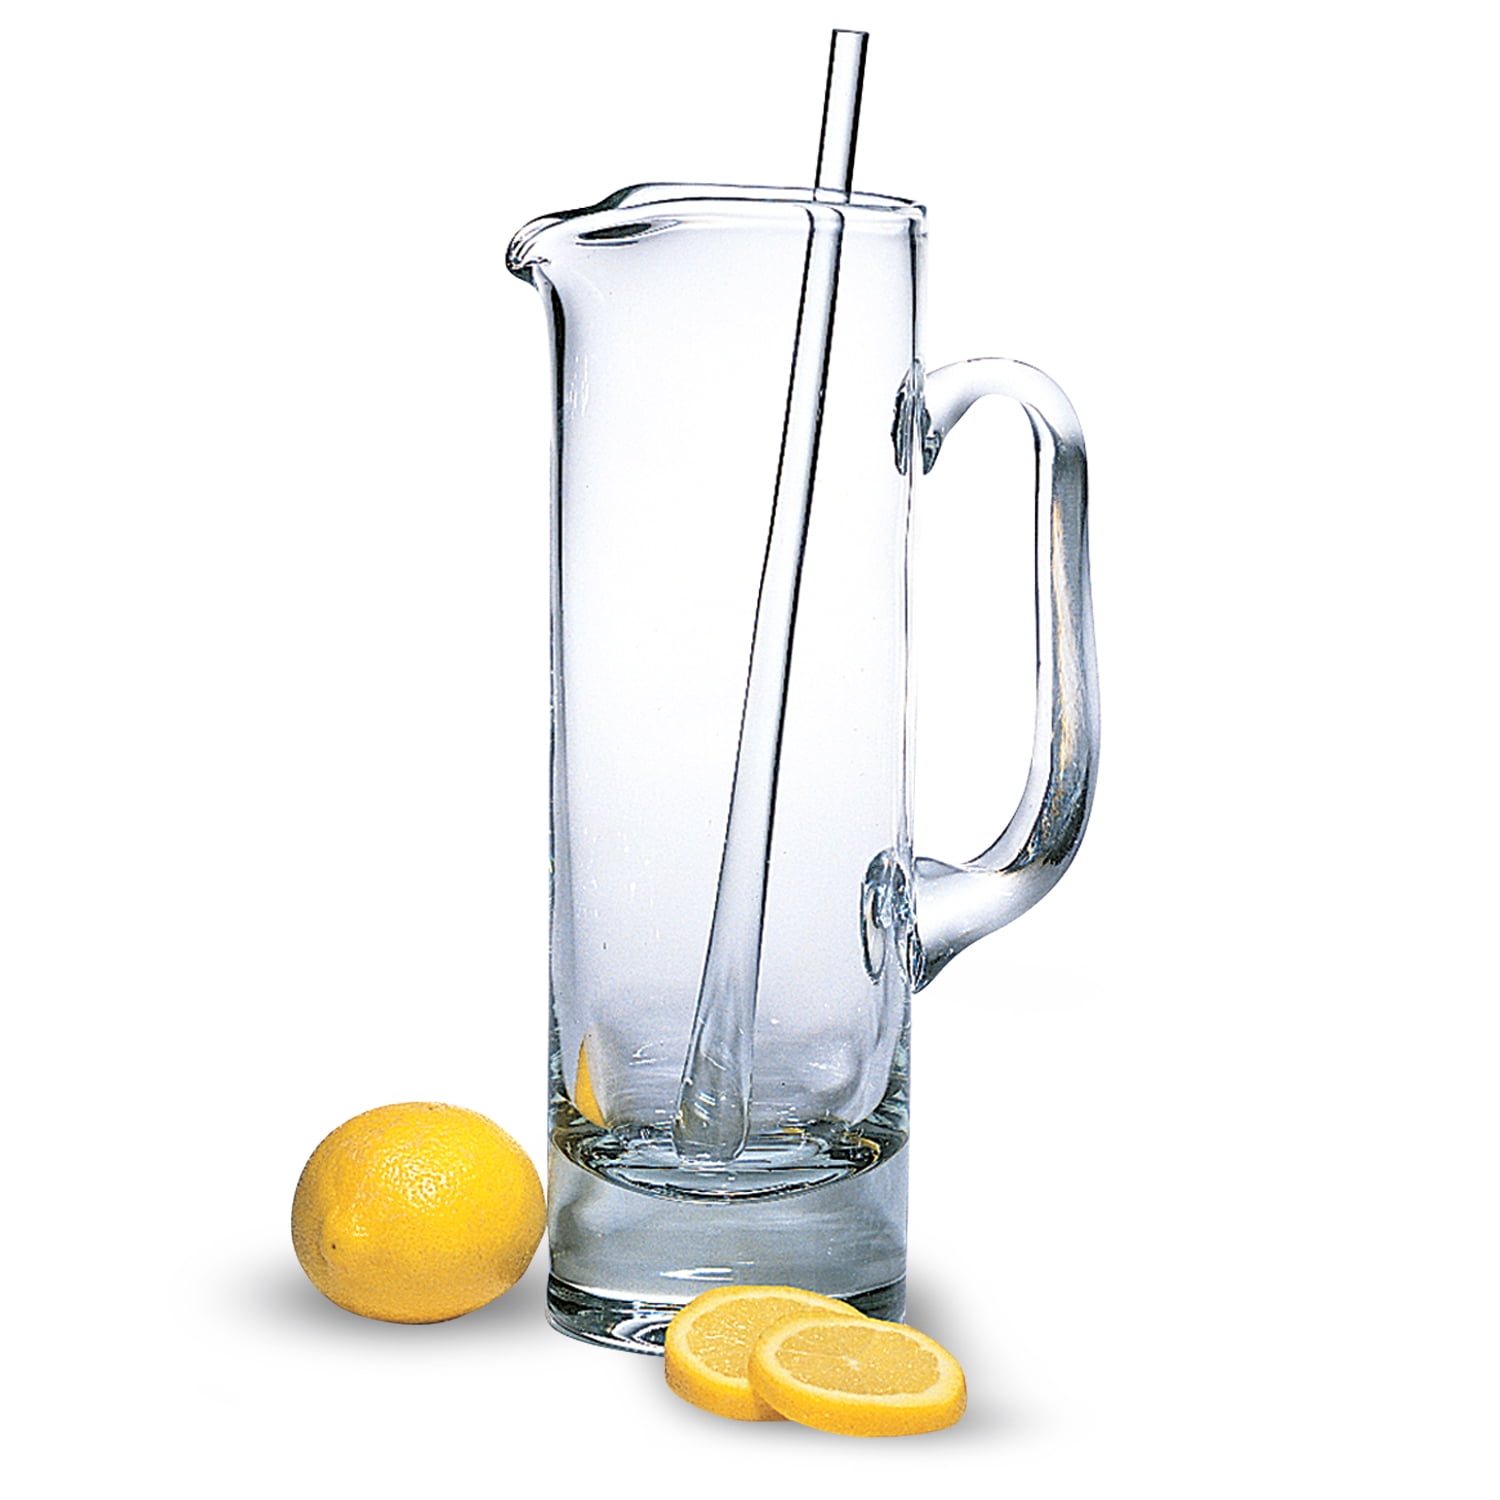 Lead Crystal Cocktail Pitcher - Allure